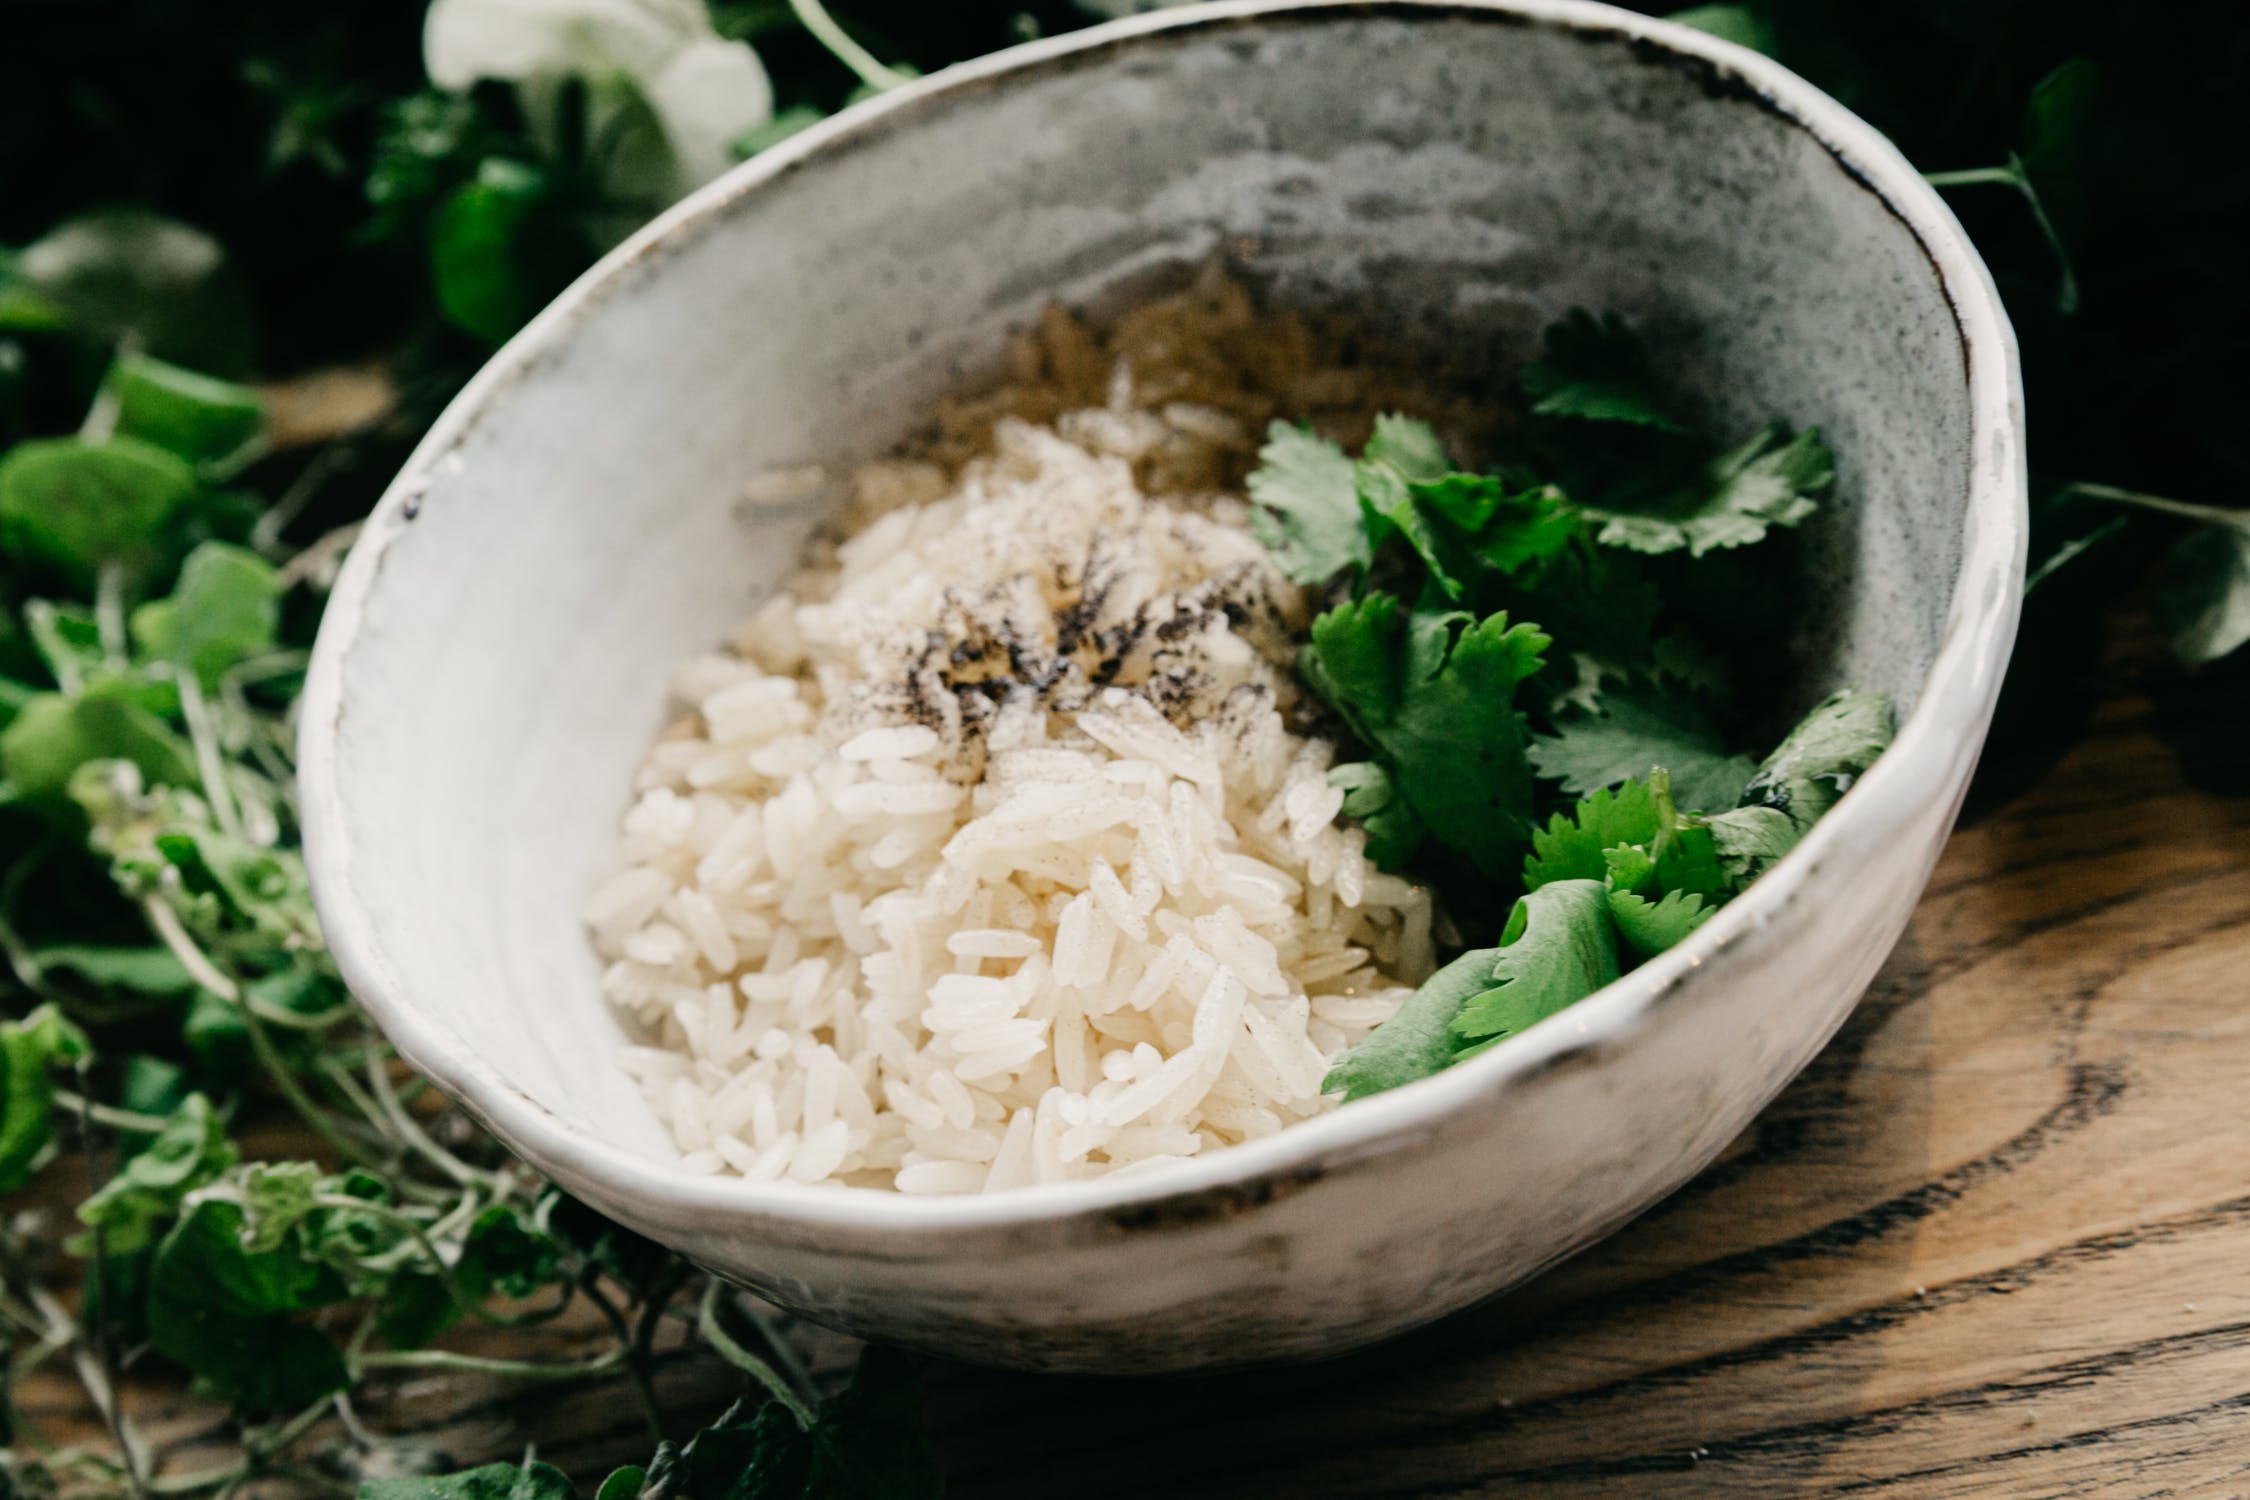 Cooked rice in a bowl with ground pepper and fresh cilantro.